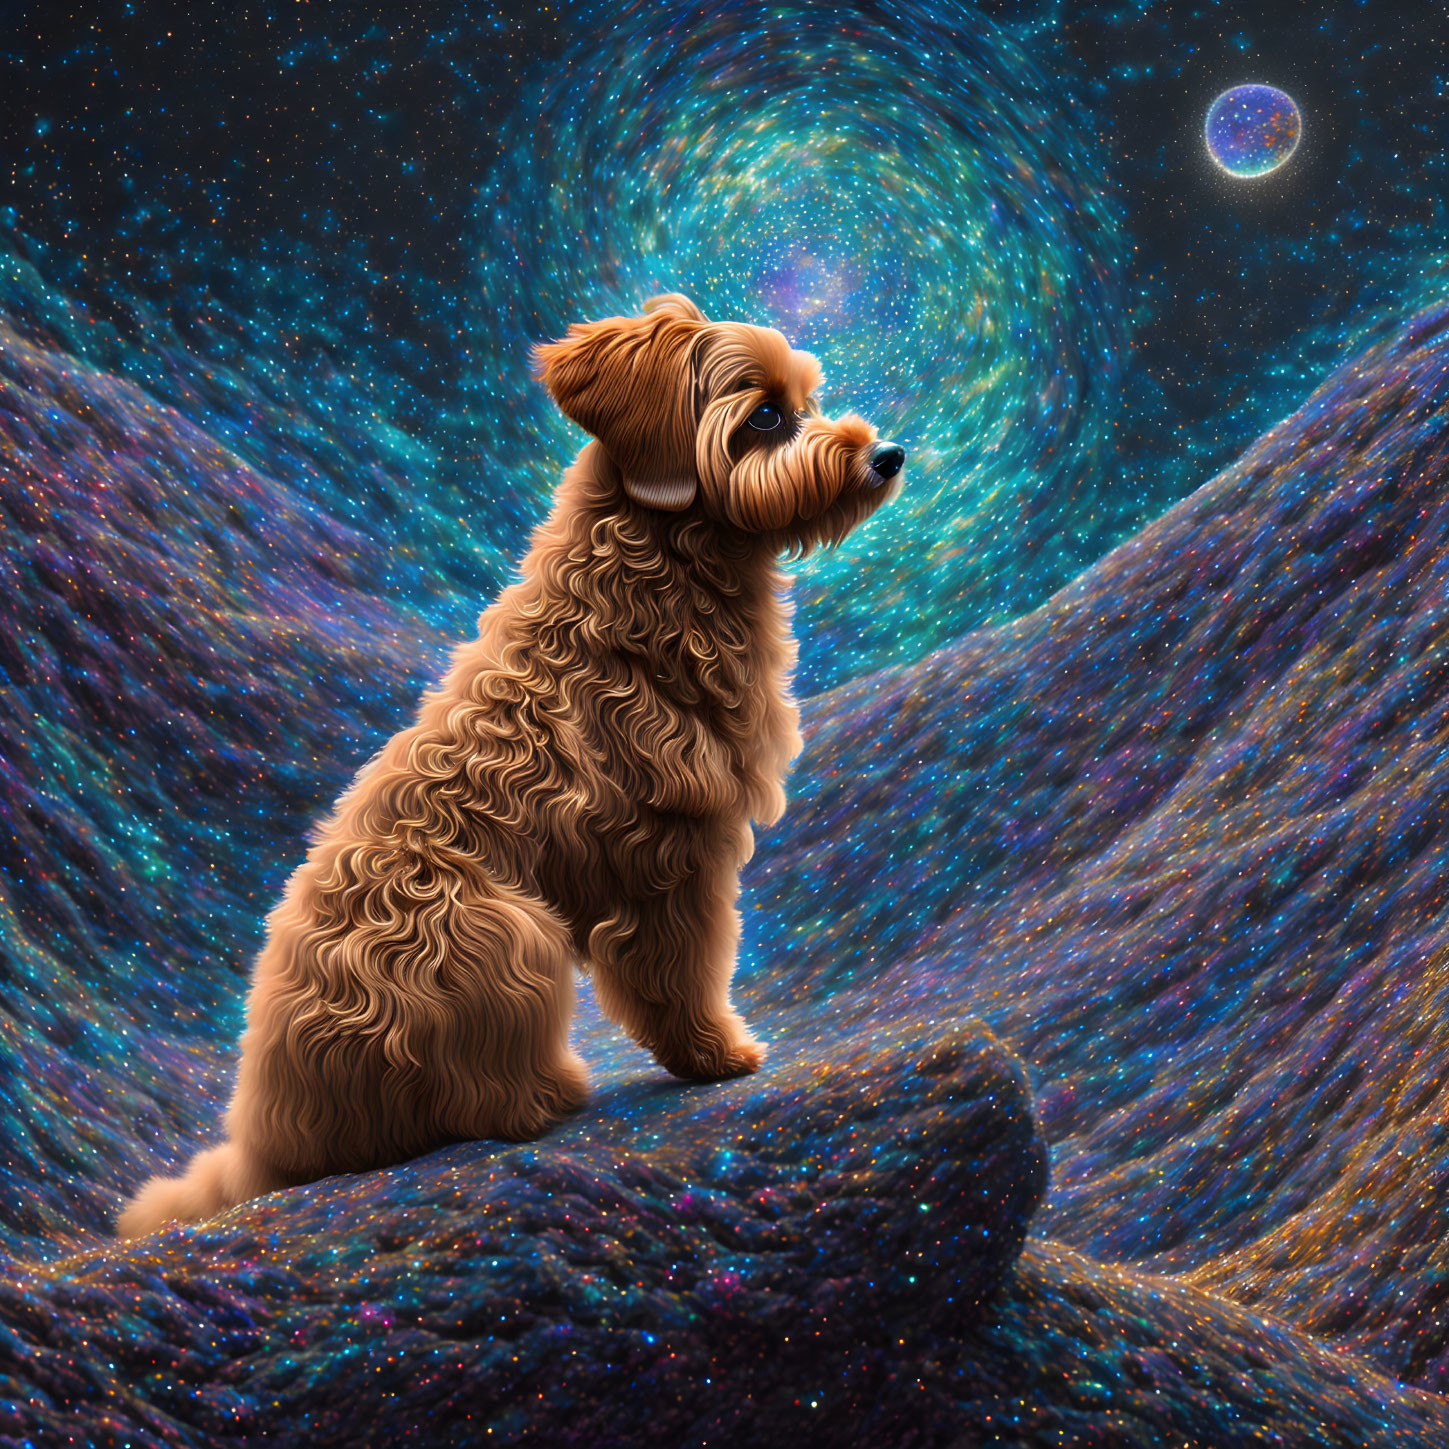 Small dog in the Universe